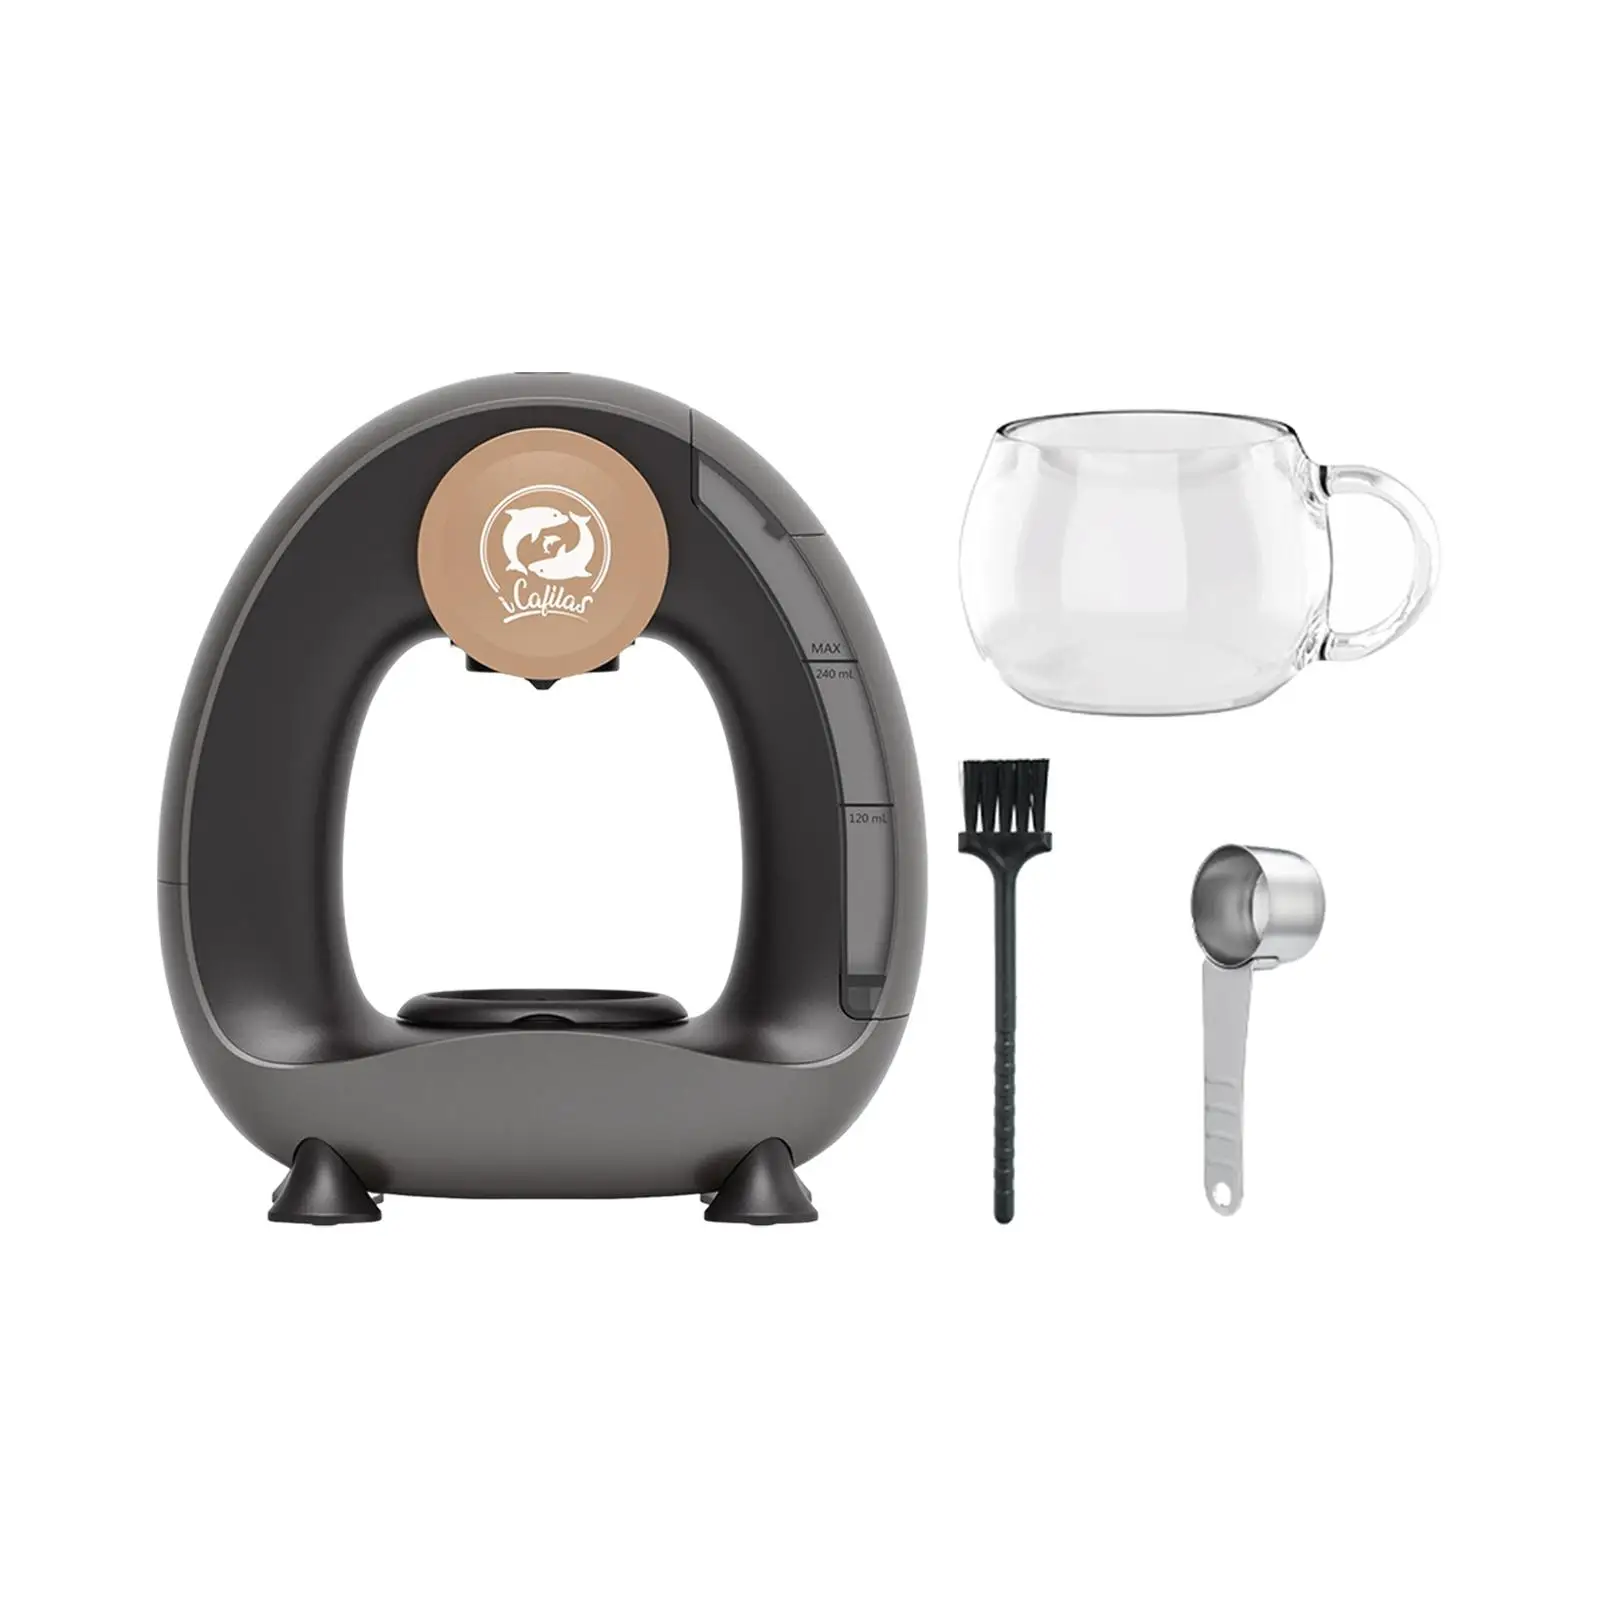 Mini Coffee Machine Removable Reusable Lightweight Easy to Clean Portable Small Coffee Maker for Camping Home Kitchen